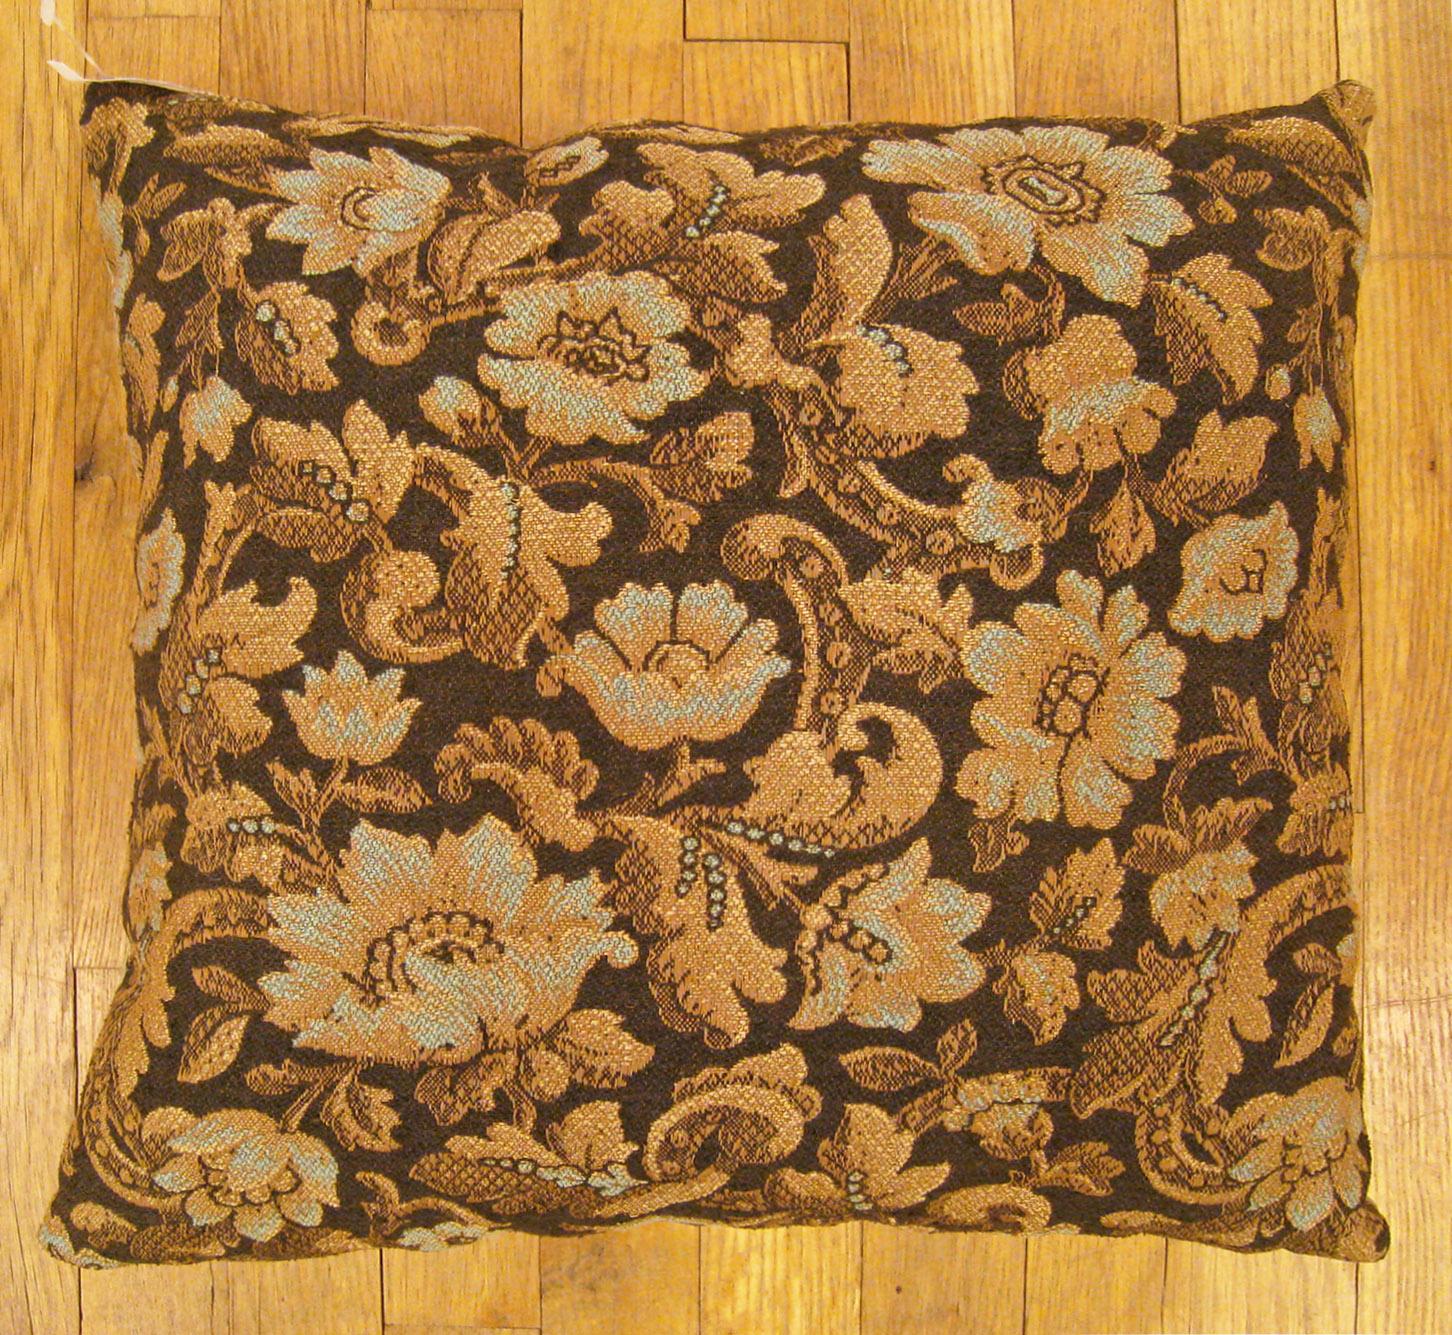 Antique Jacquard Tapestry Pillow; size 1'5” x 1'5”.

An antique decorative pillow with floral elements allover a light gold central field, size 1'5